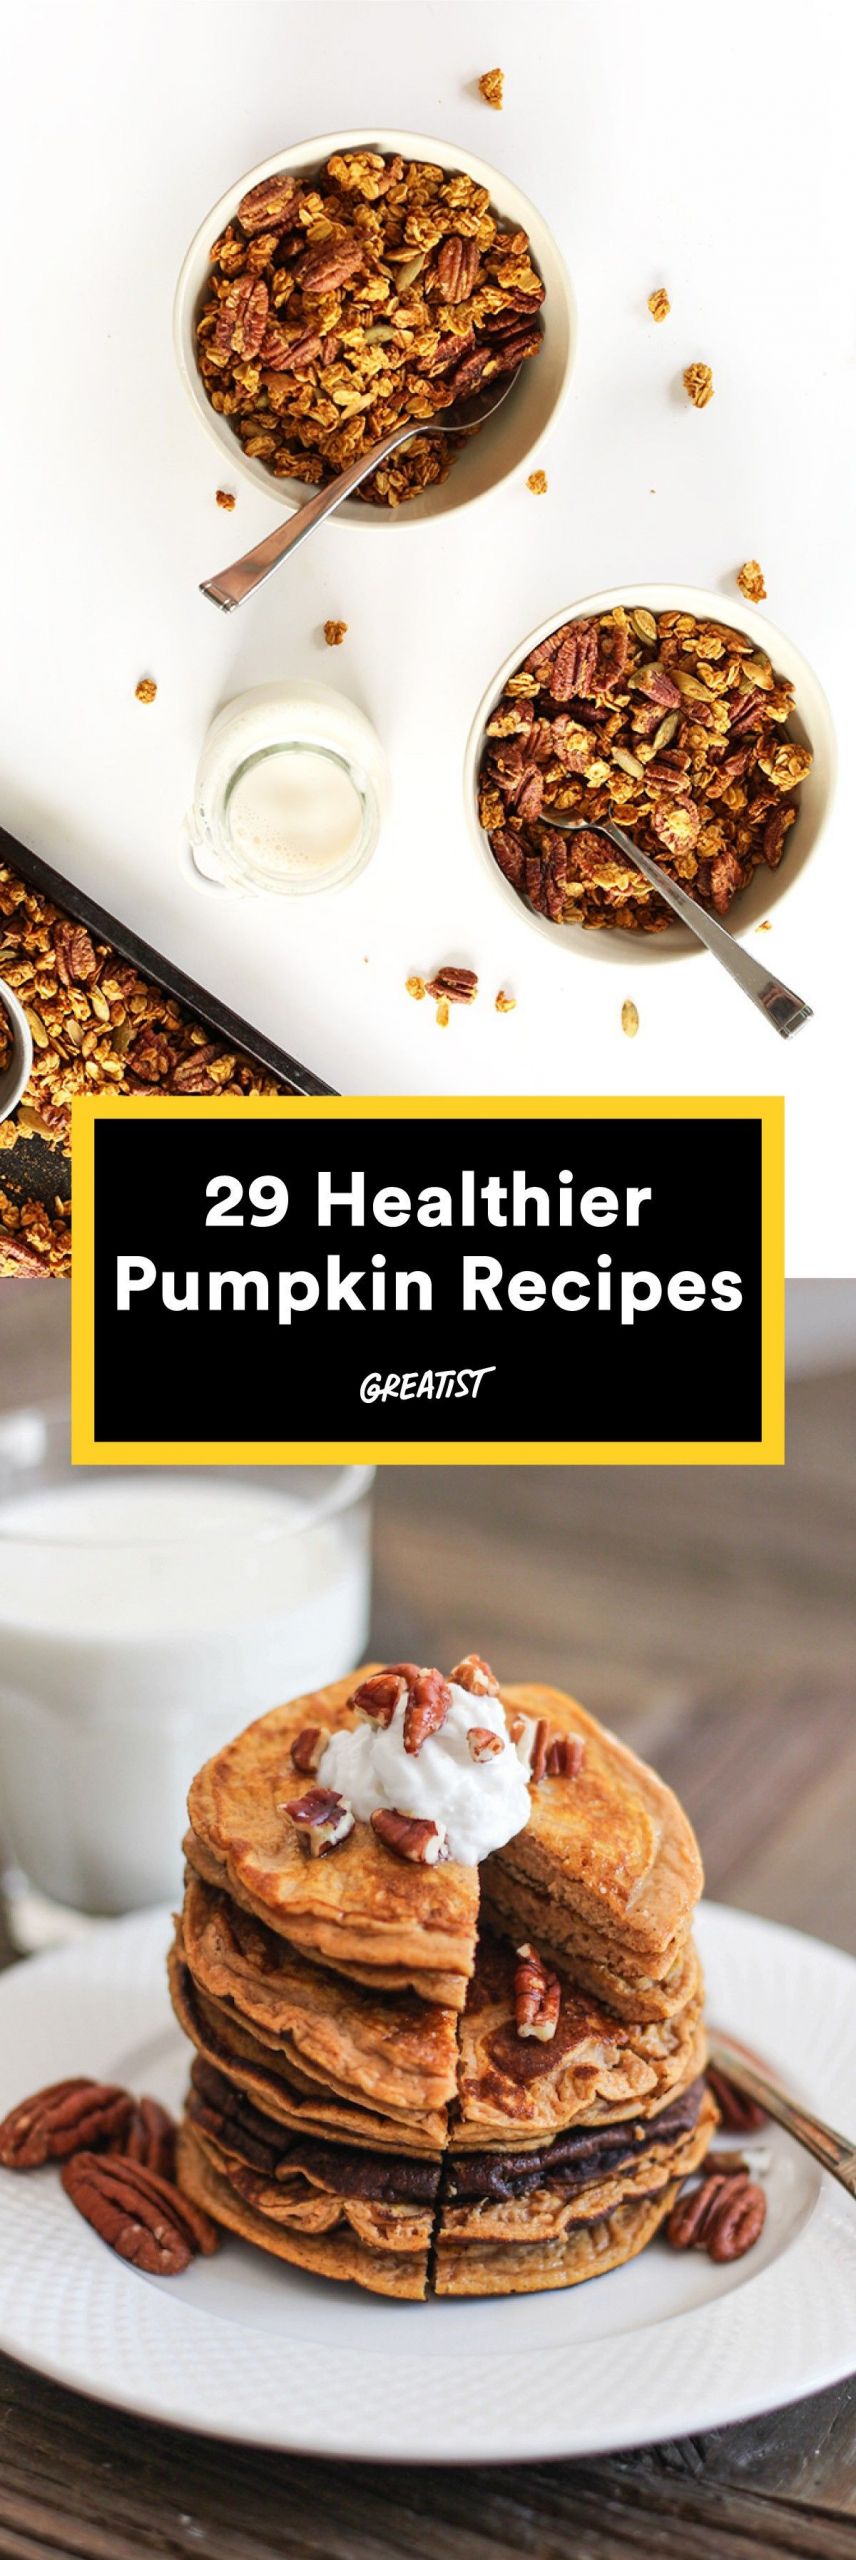 Low Calorie Canned Pumpkin Recipes
 29 Unexpected but Awesome Ways to Use Canned Pumpkin